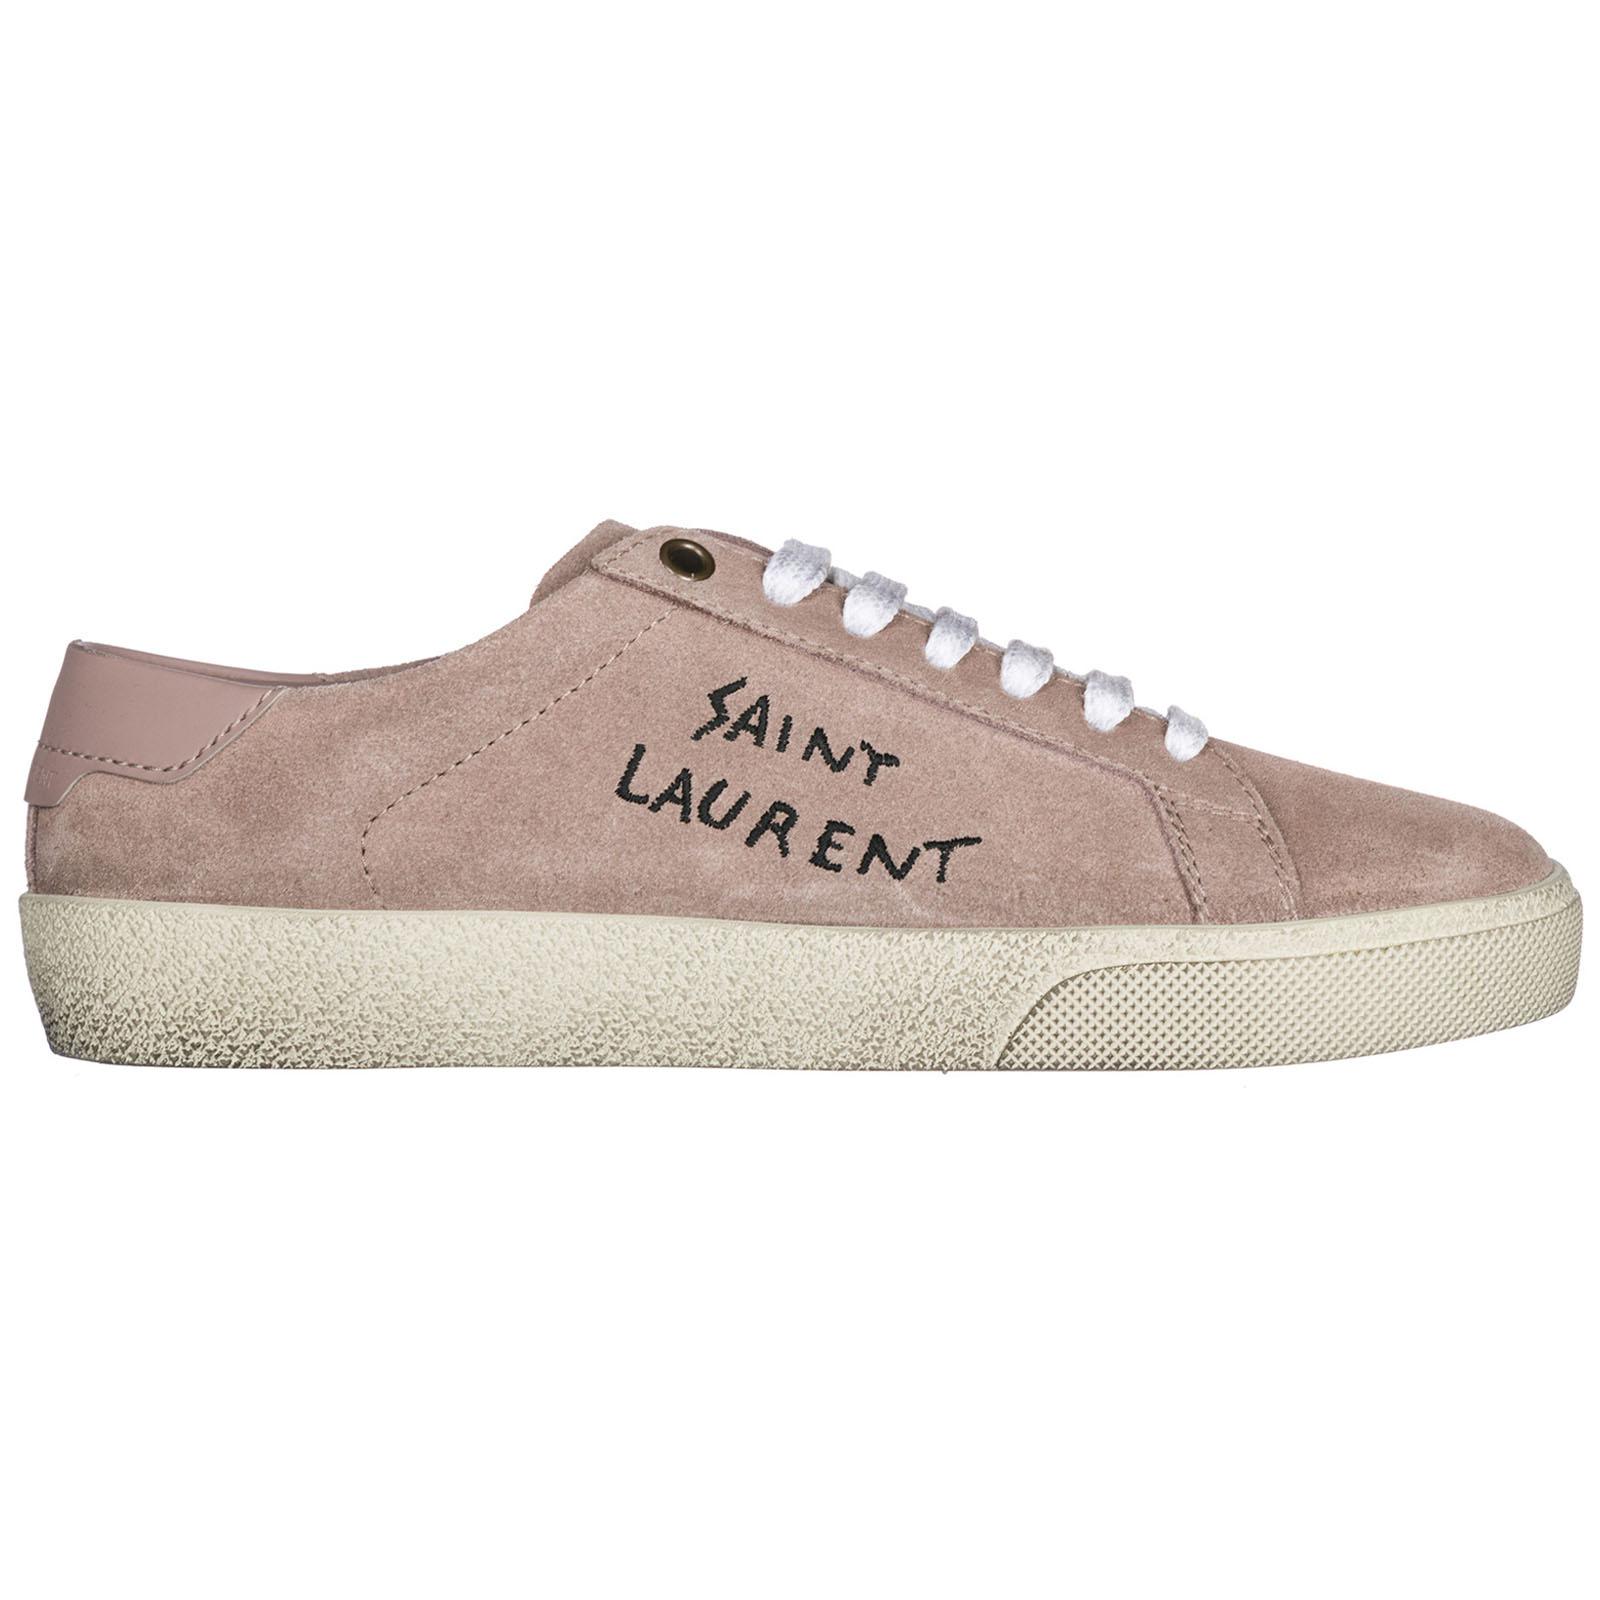 Saint Laurent Shoes Suede Trainers Sneakers in Rose Antique (Pink) | Lyst